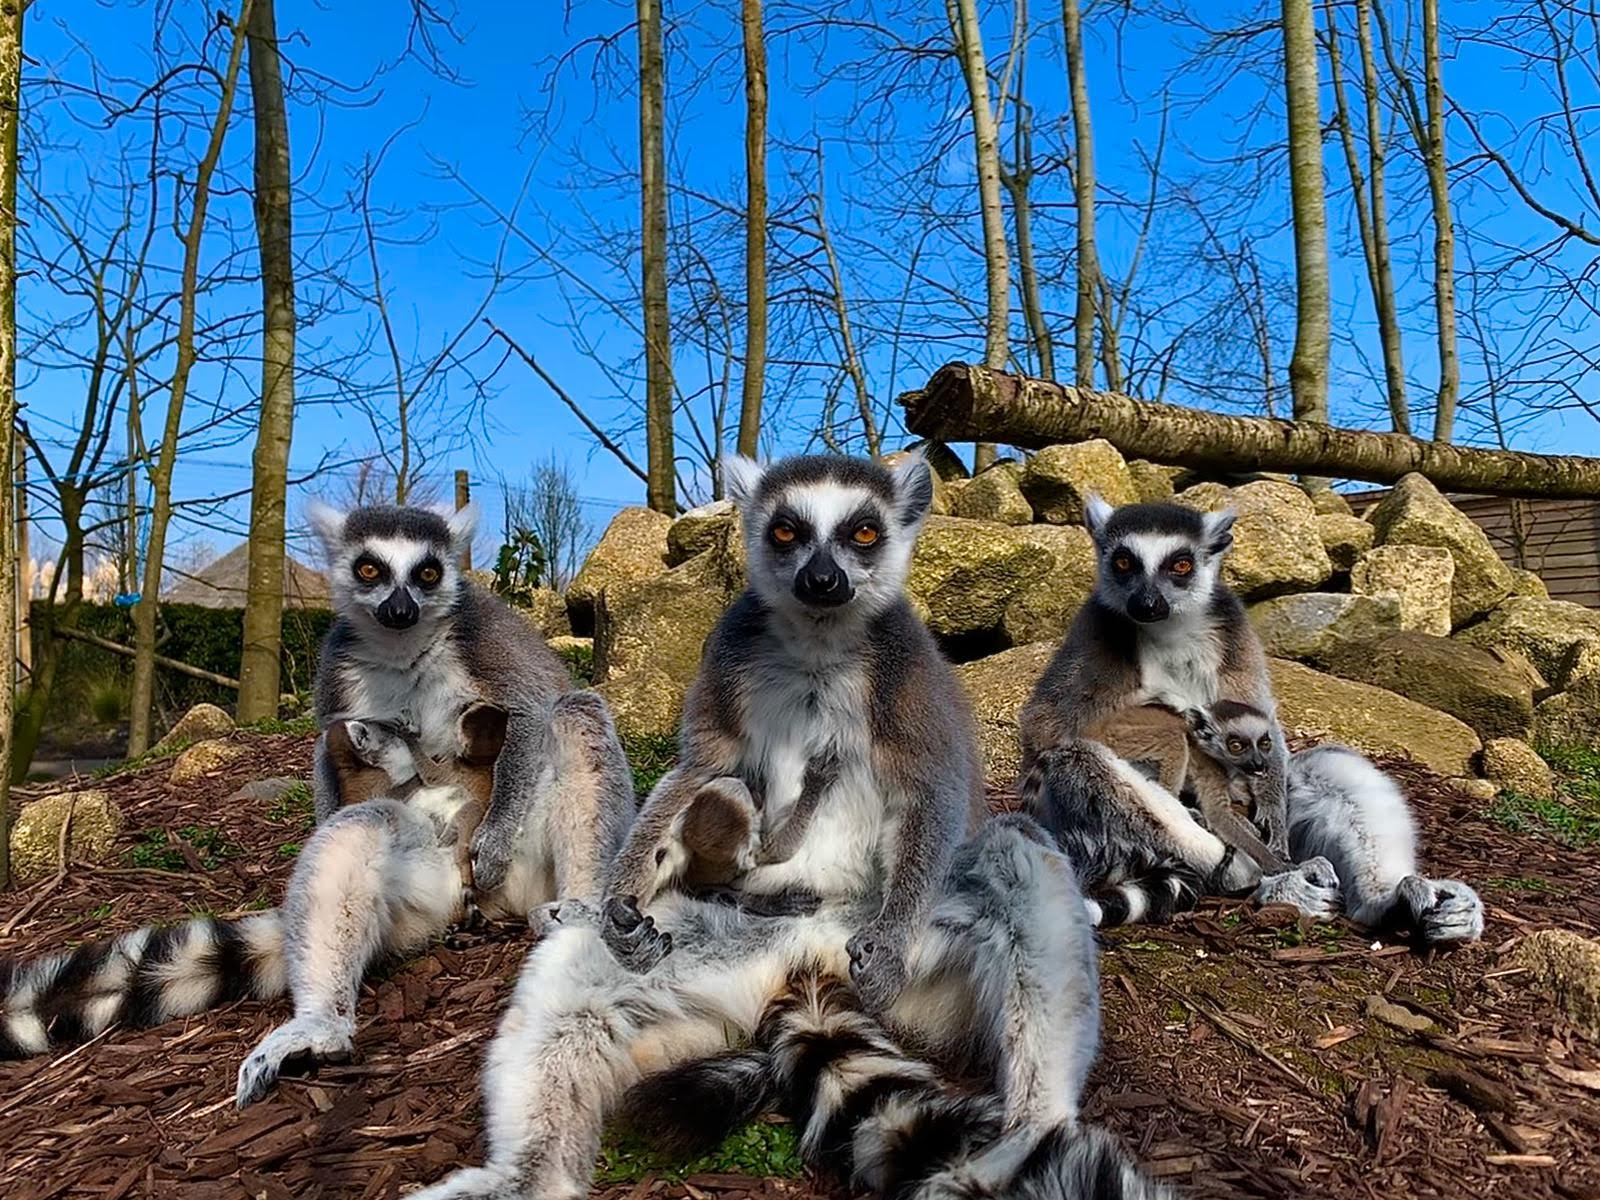 Tayto Park welcomes the arrival of twin Lemurs